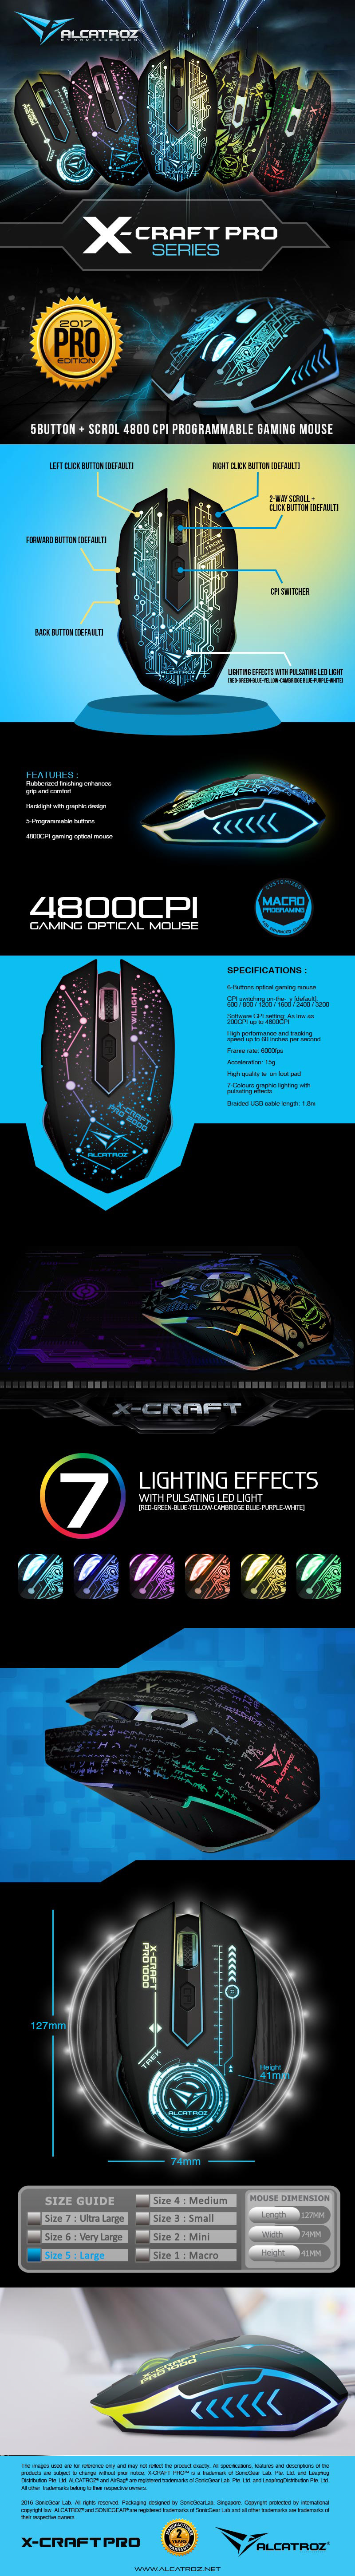 Mouse-Mouse-Pads-Alcatroz-X-Craft-PRO-Tron-5000-7-Colour-Optical-Gaming-Mouse-2